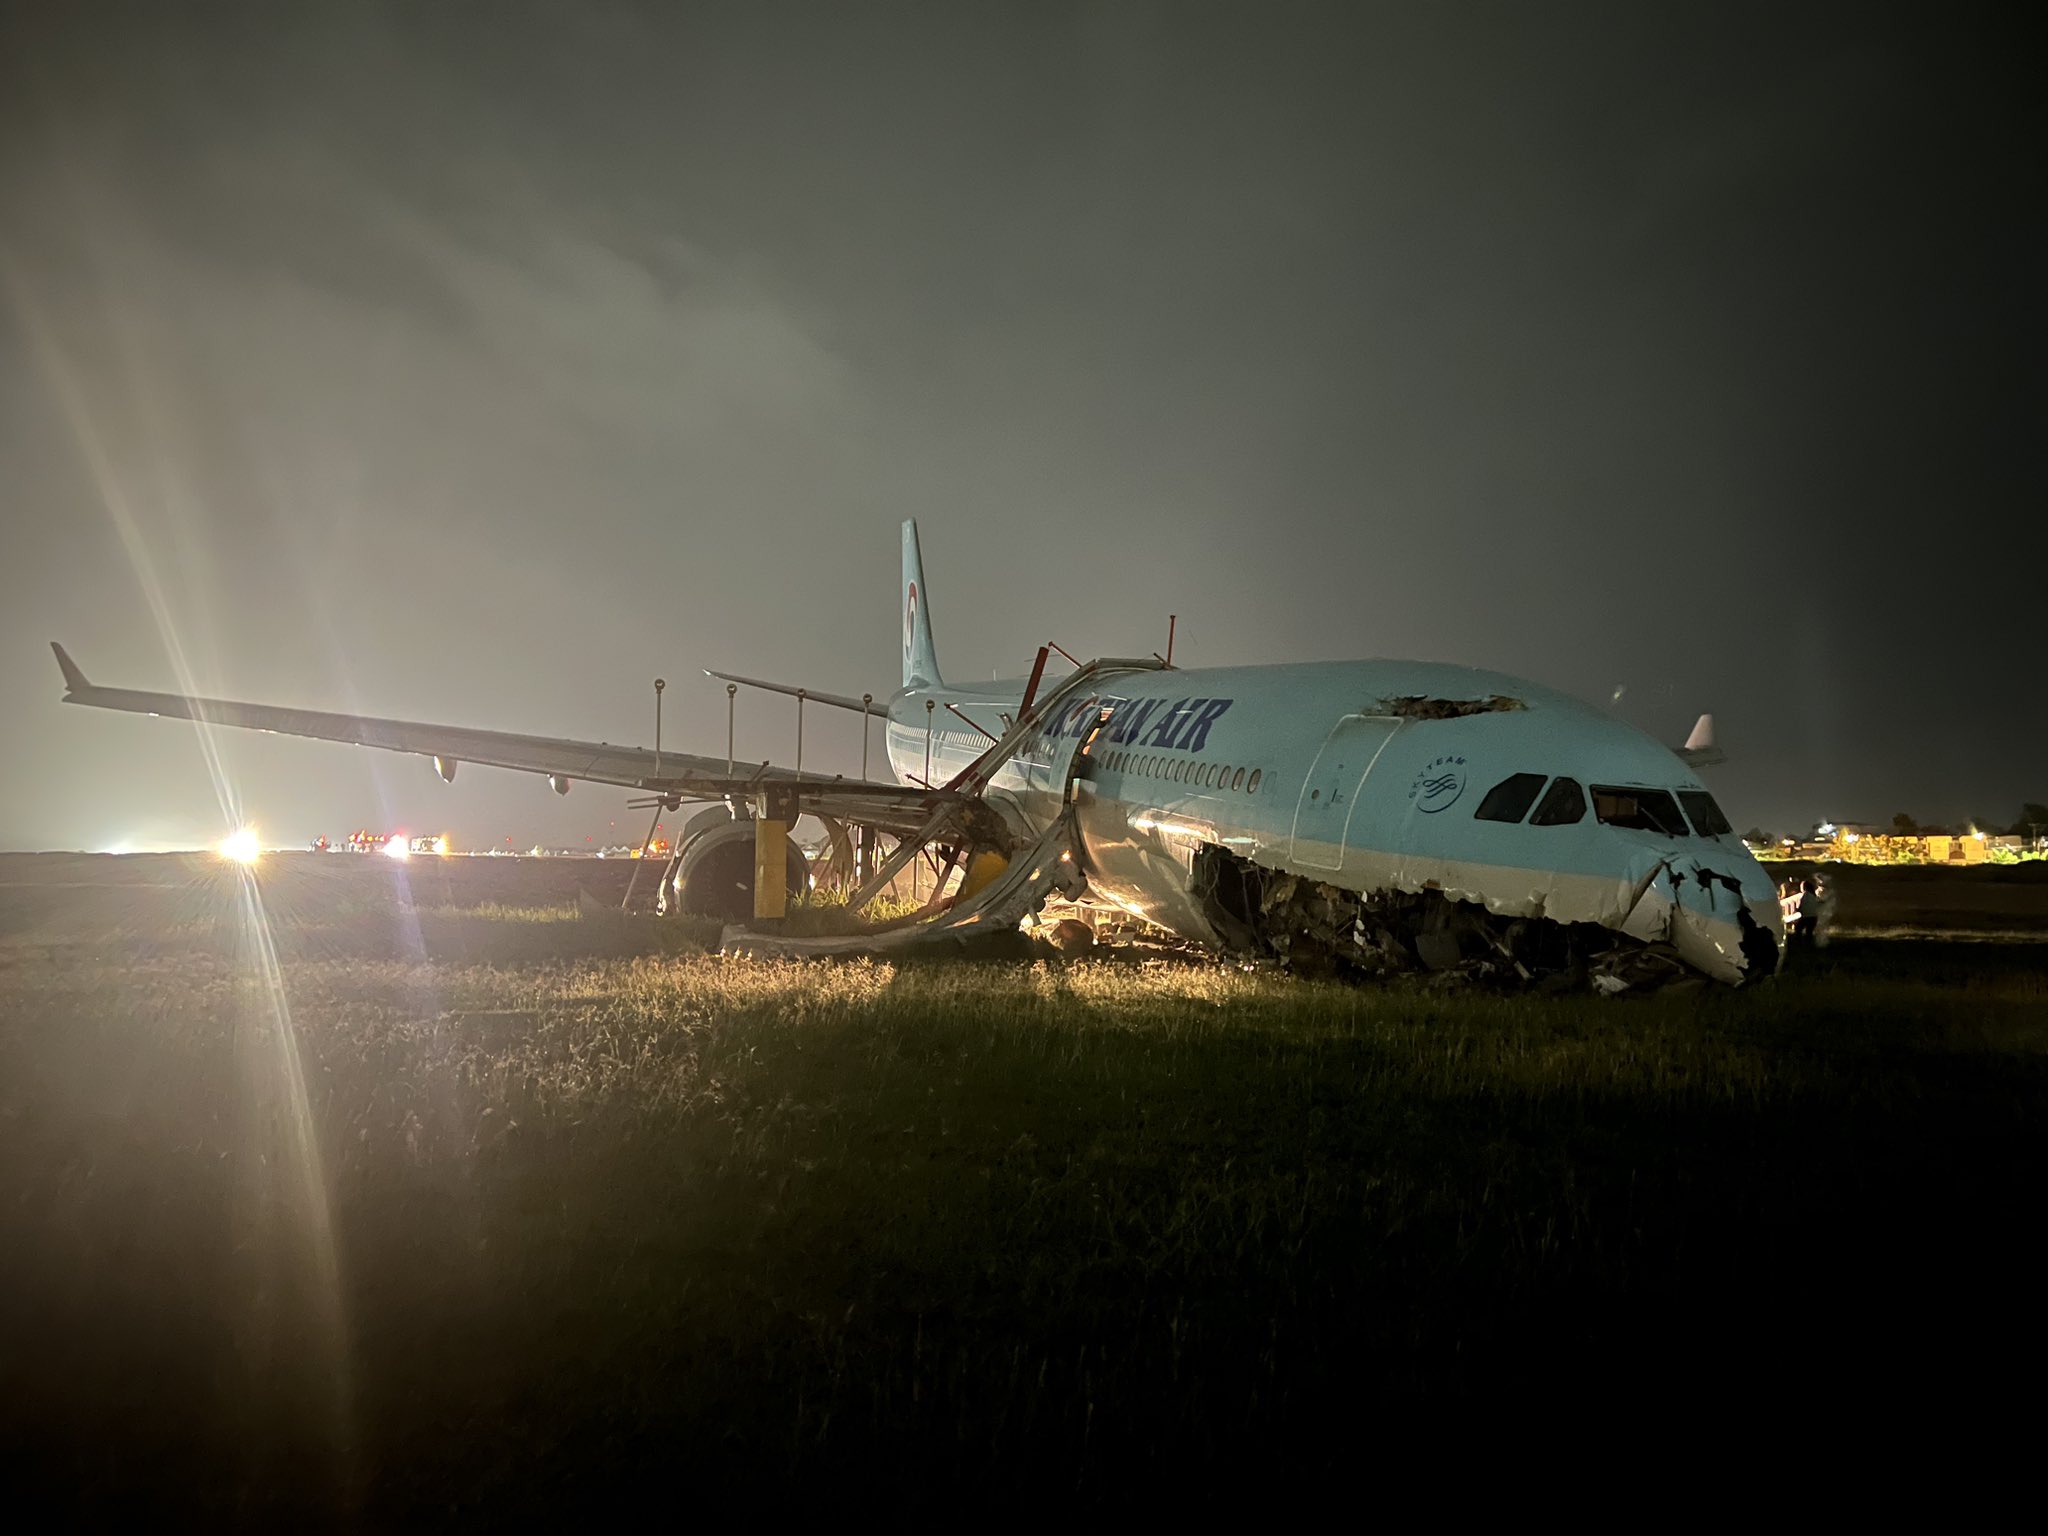 an airplane that has been crashed at night